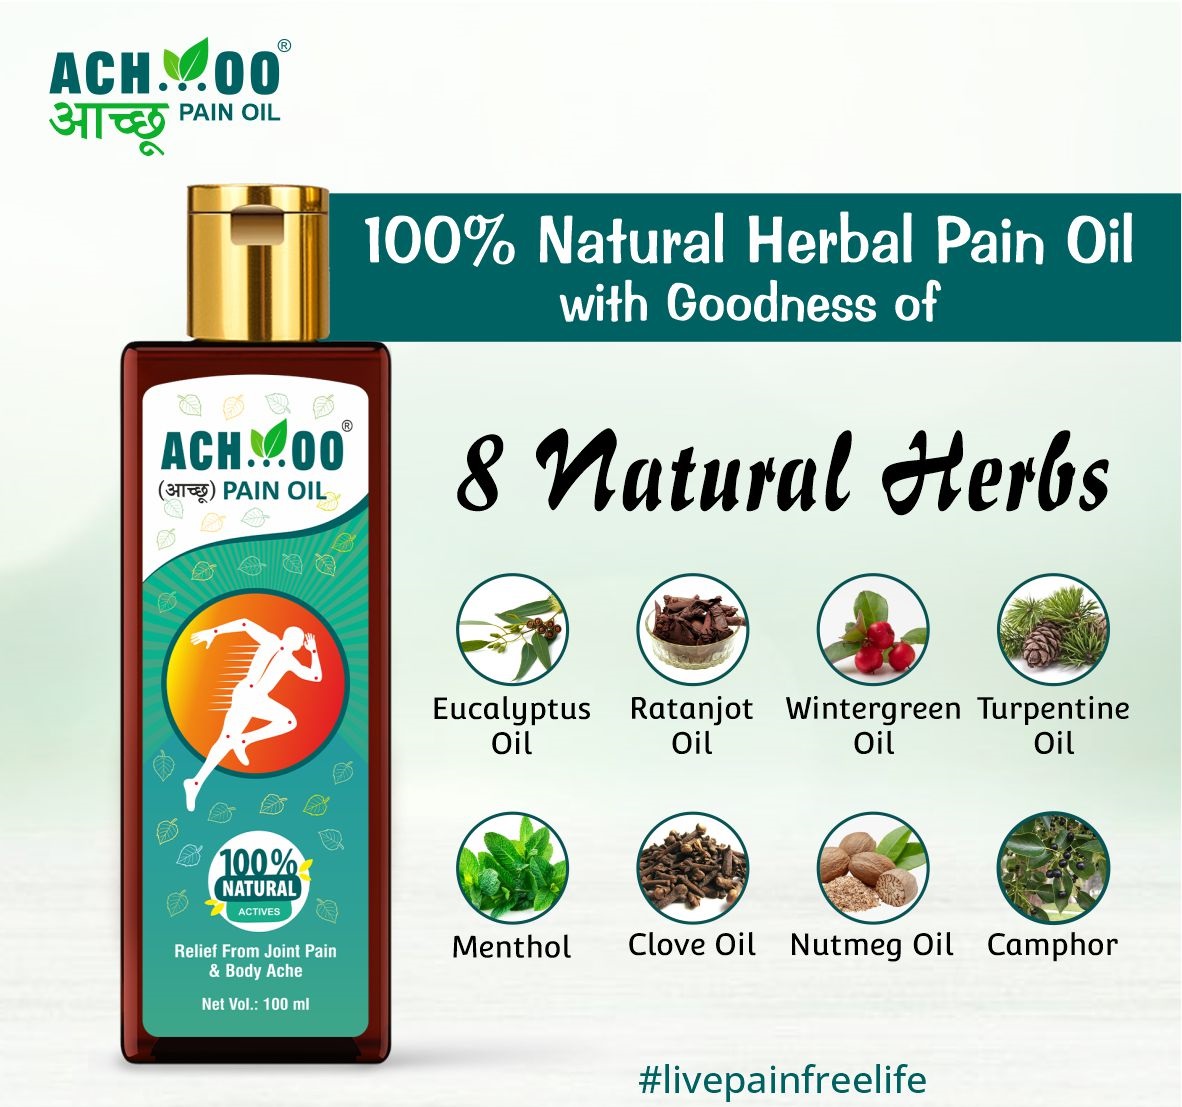 Benefits of Massage with Achoo pain relief oilHealth and BeautyHealth Care ProductsGurgaonNew Colony